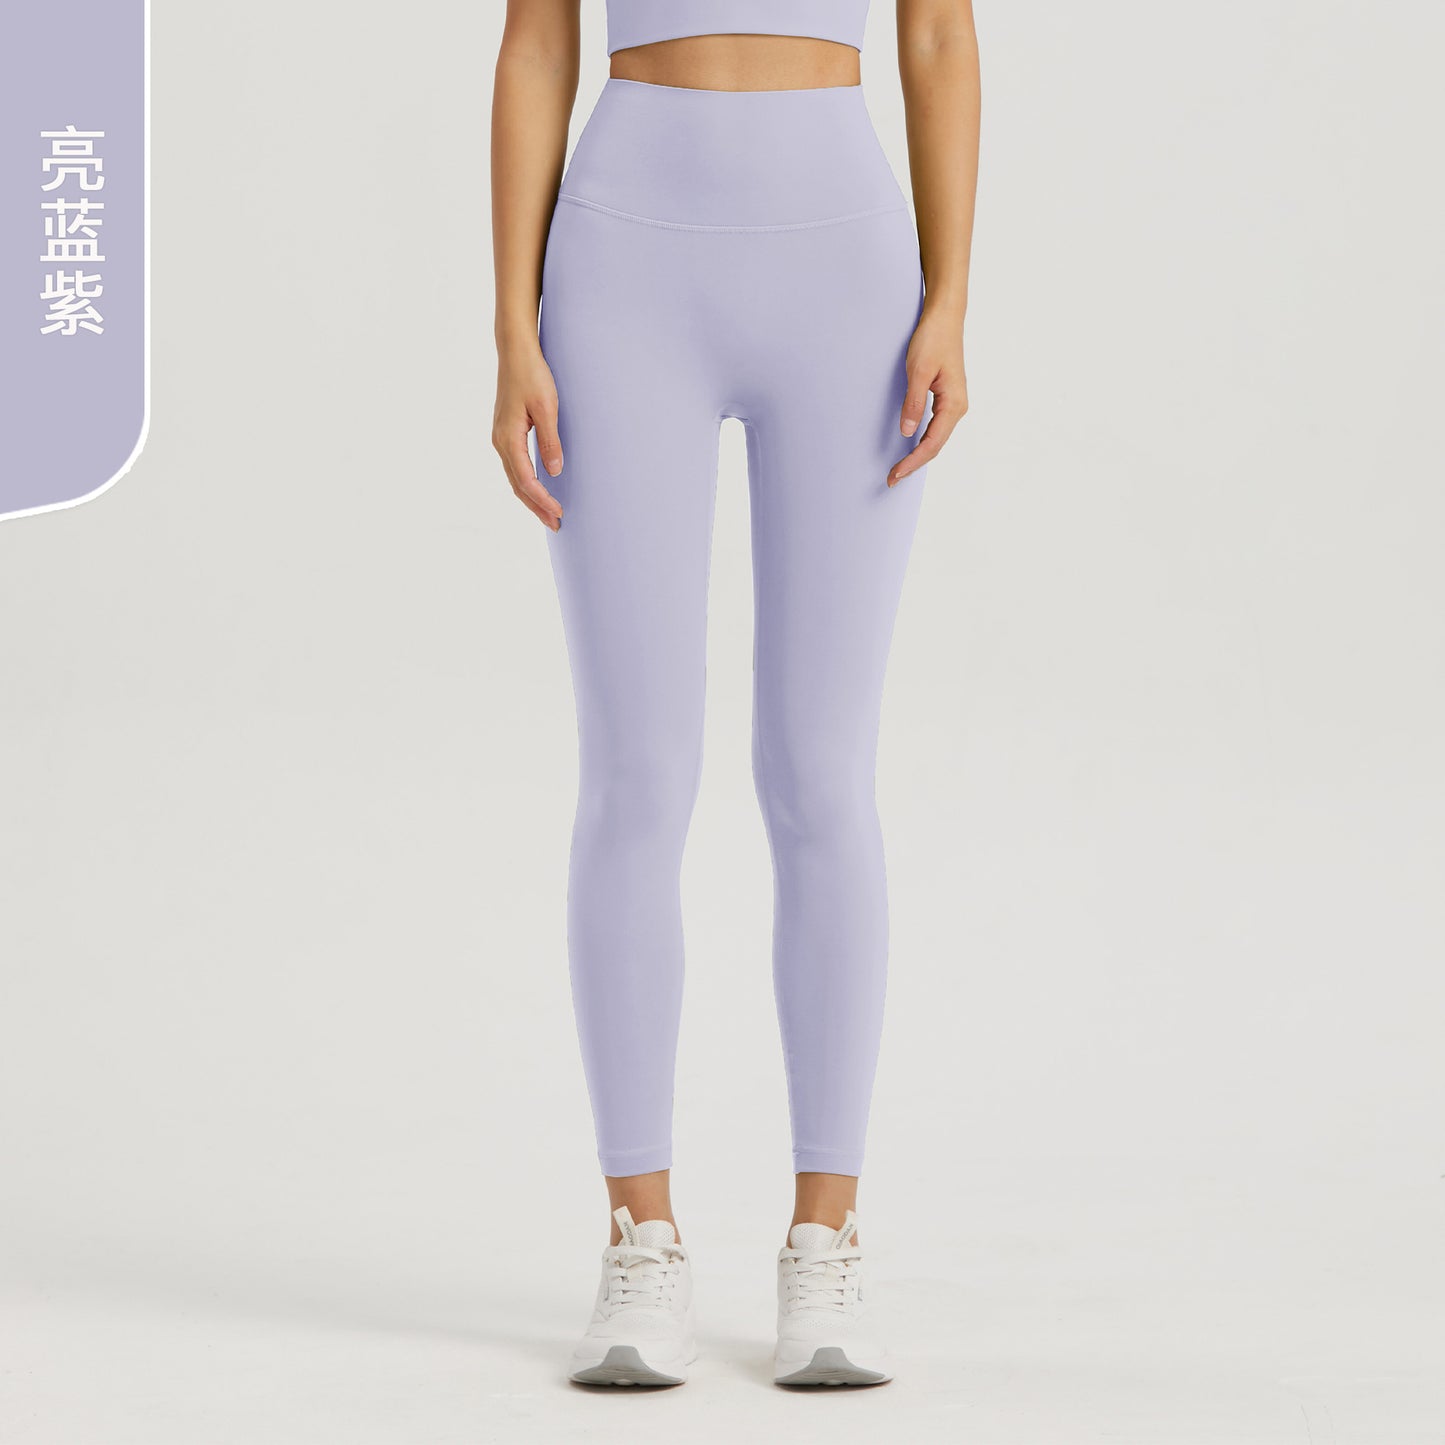 2023 spring and summer new no-embarrassment-free Lycra nude yoga pants anti-curling pocket peach fitness pants